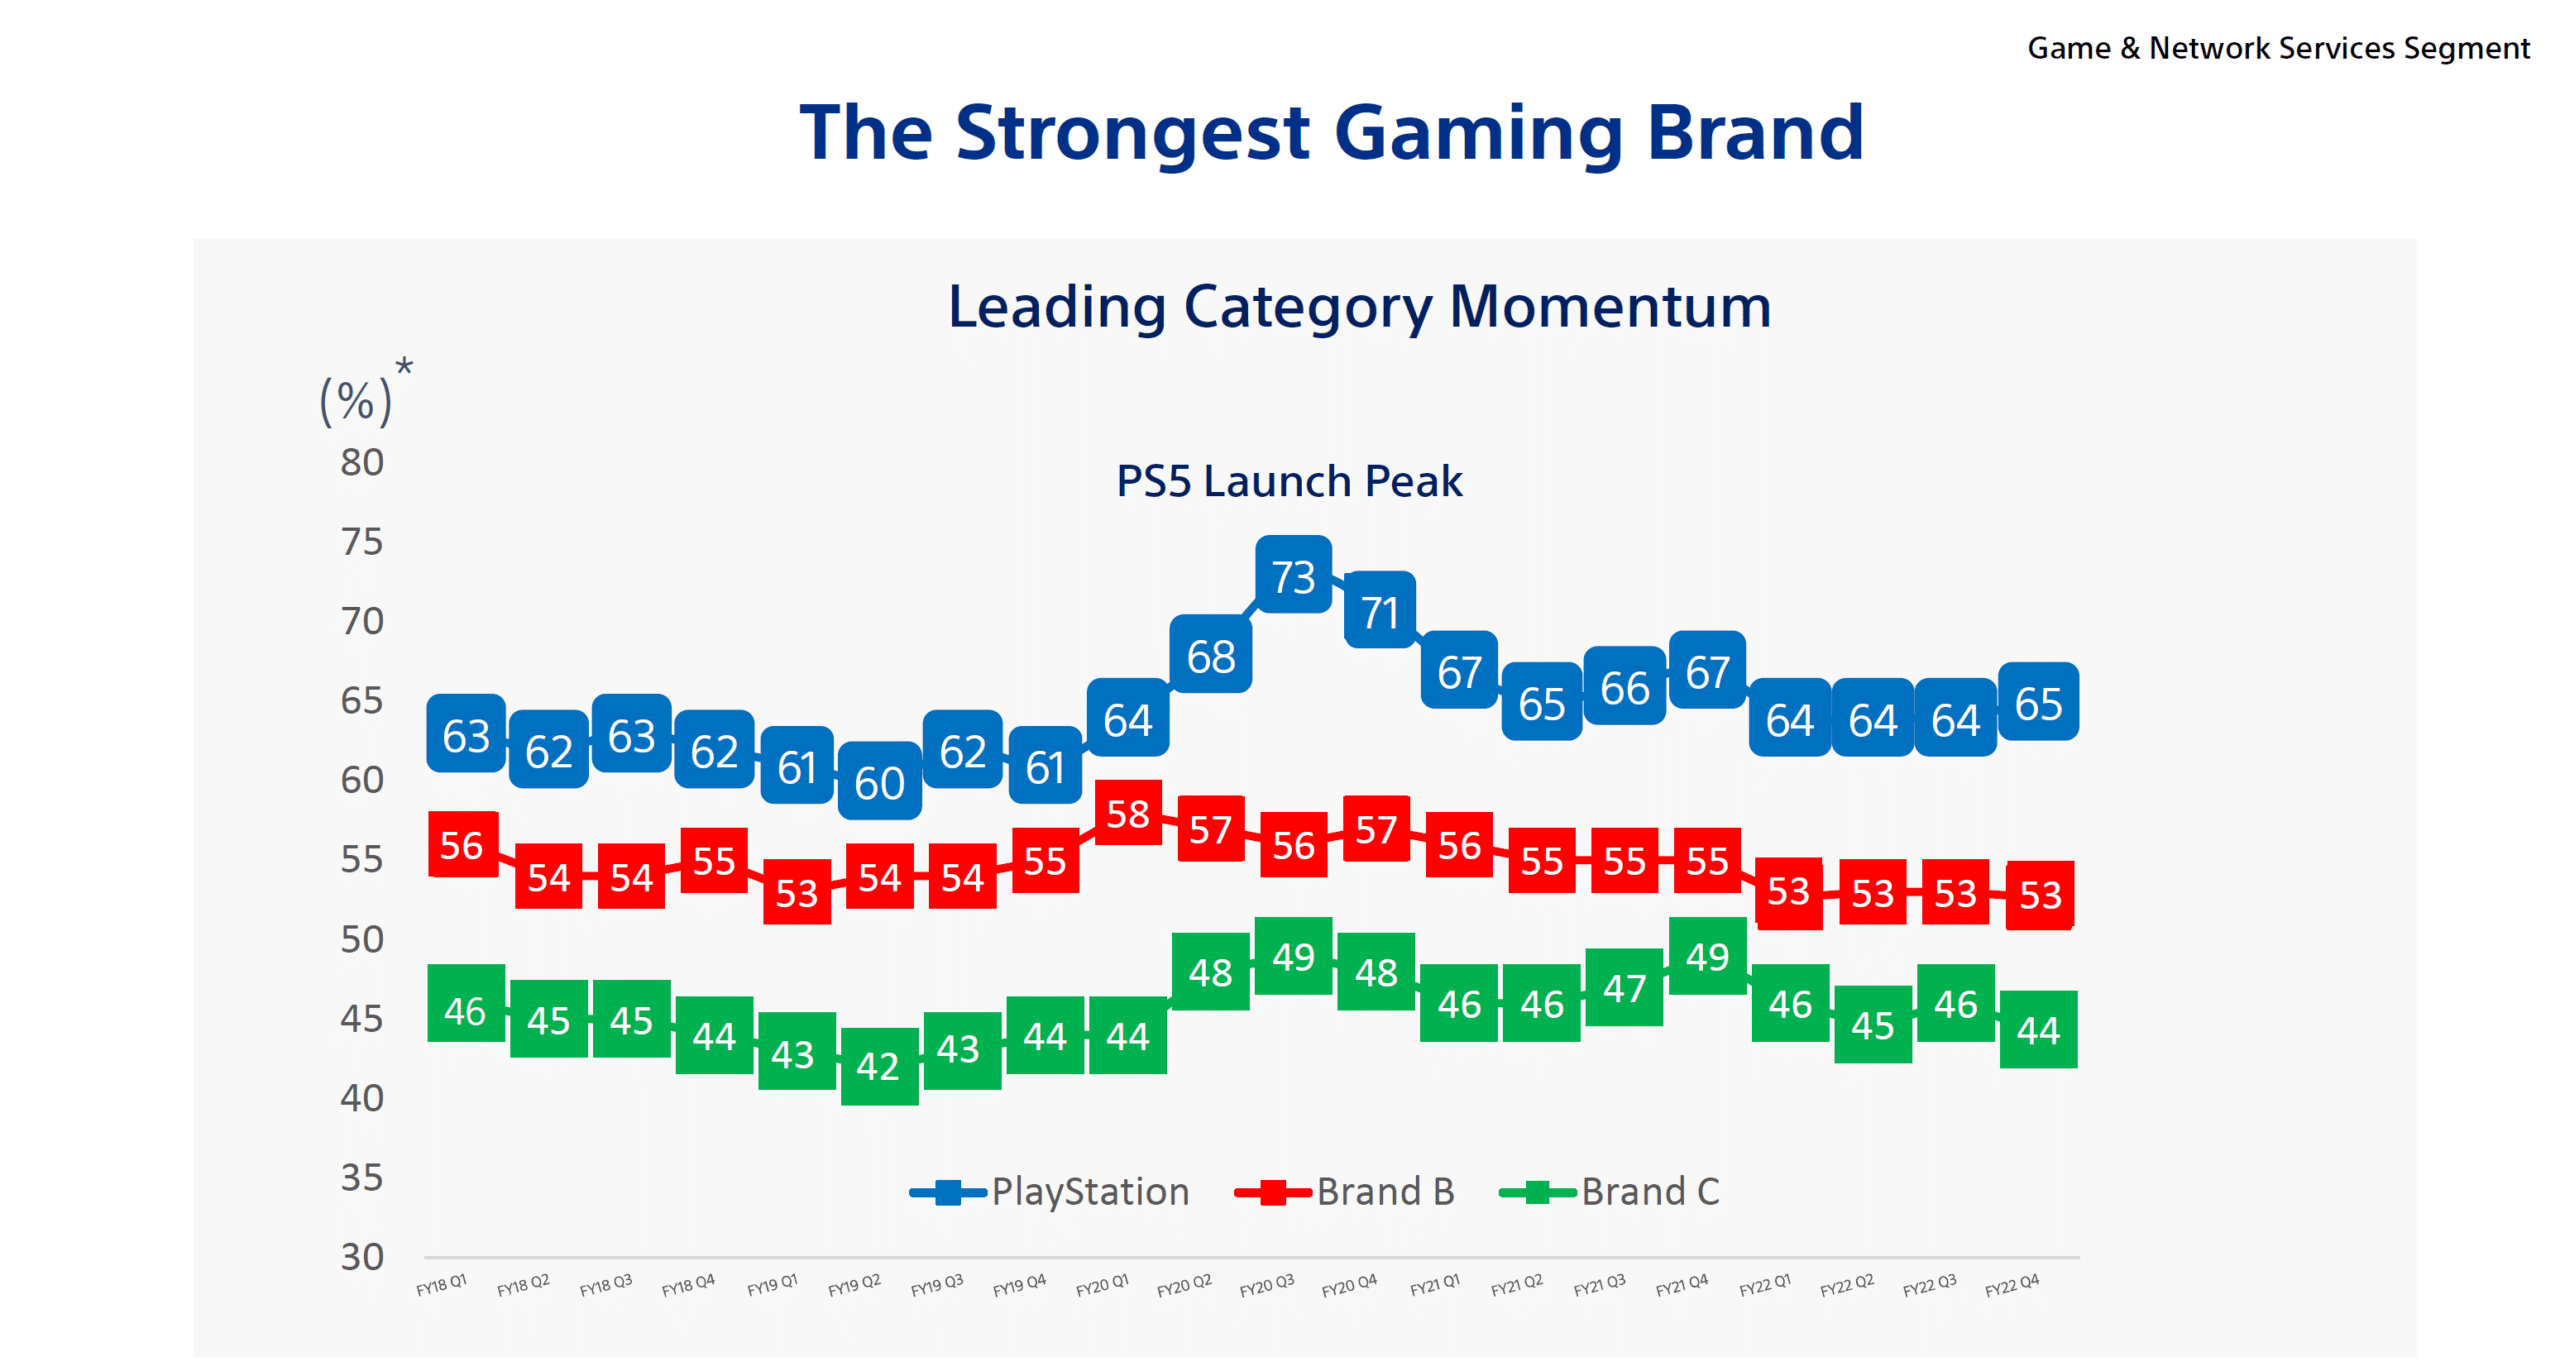 PlayStation outperforms its competitors